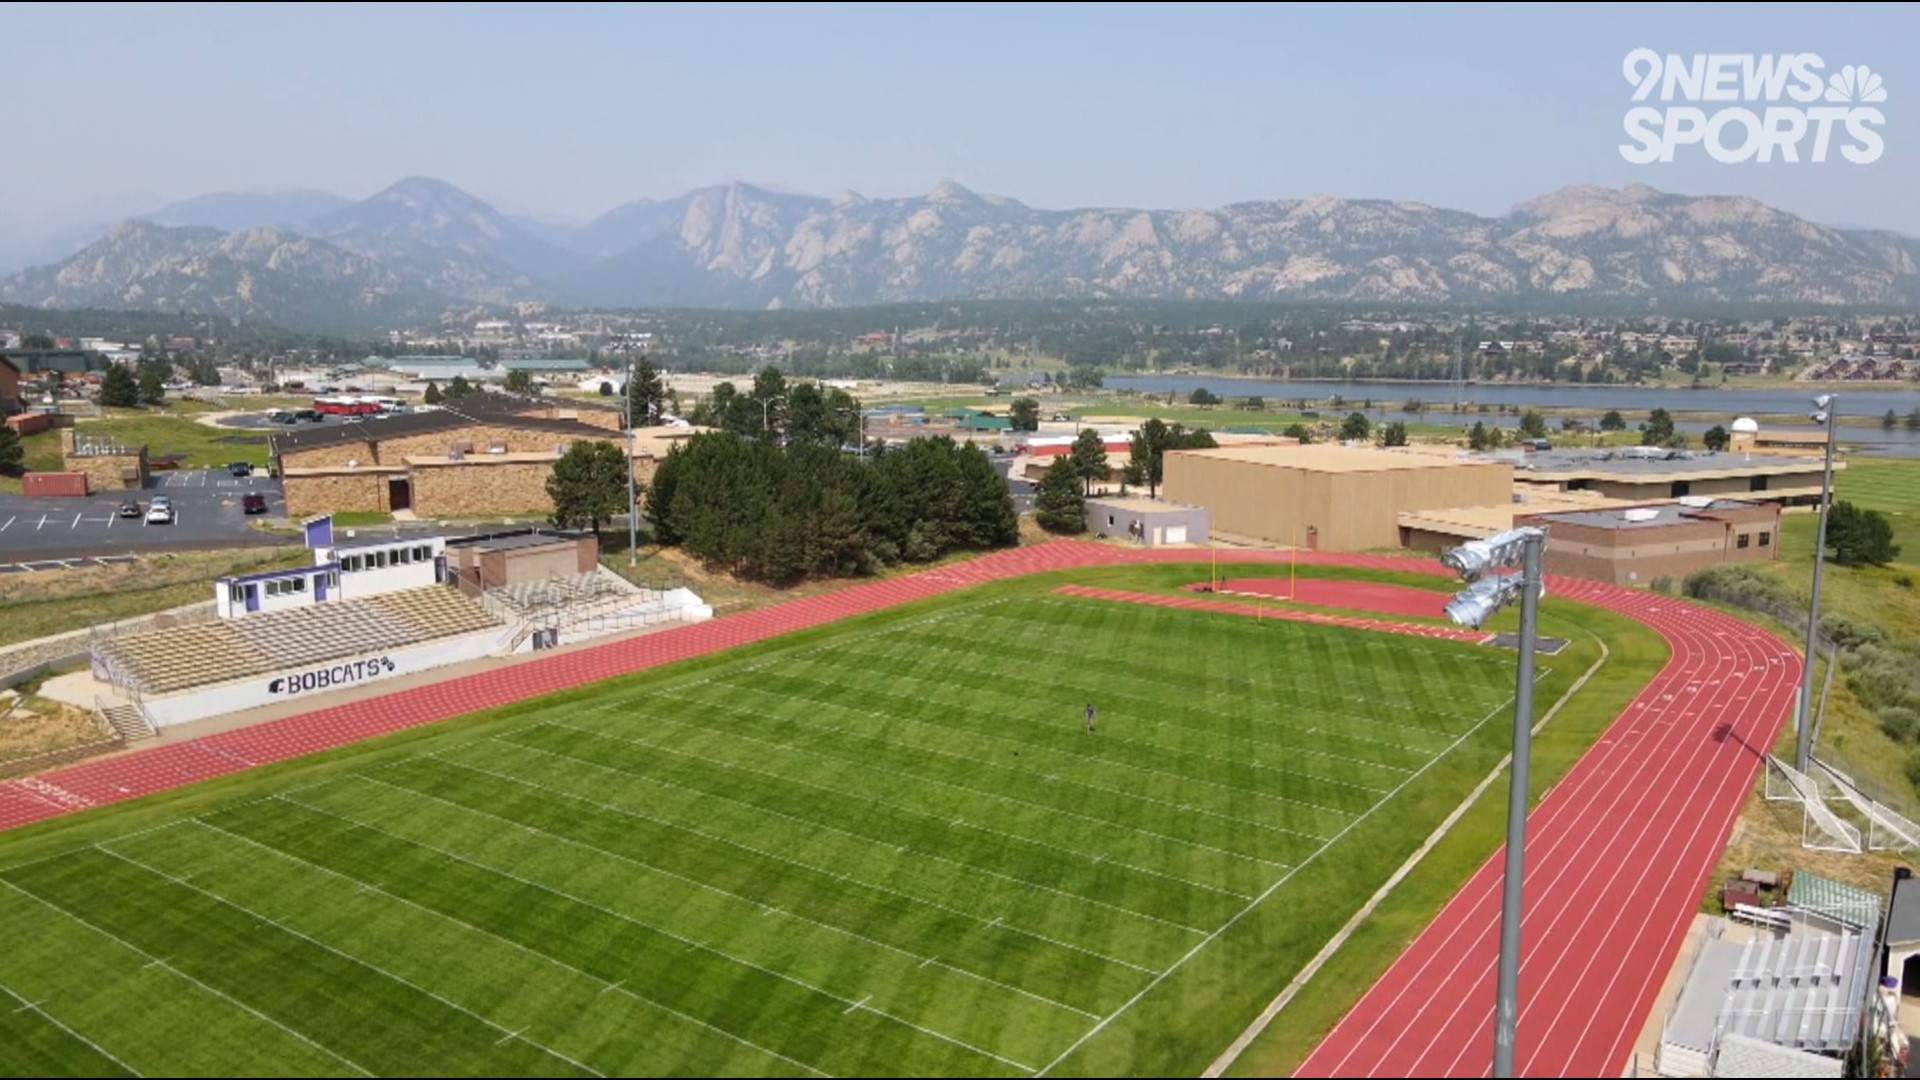 The football field at Estes Park is surrounded by mountains and a lake.